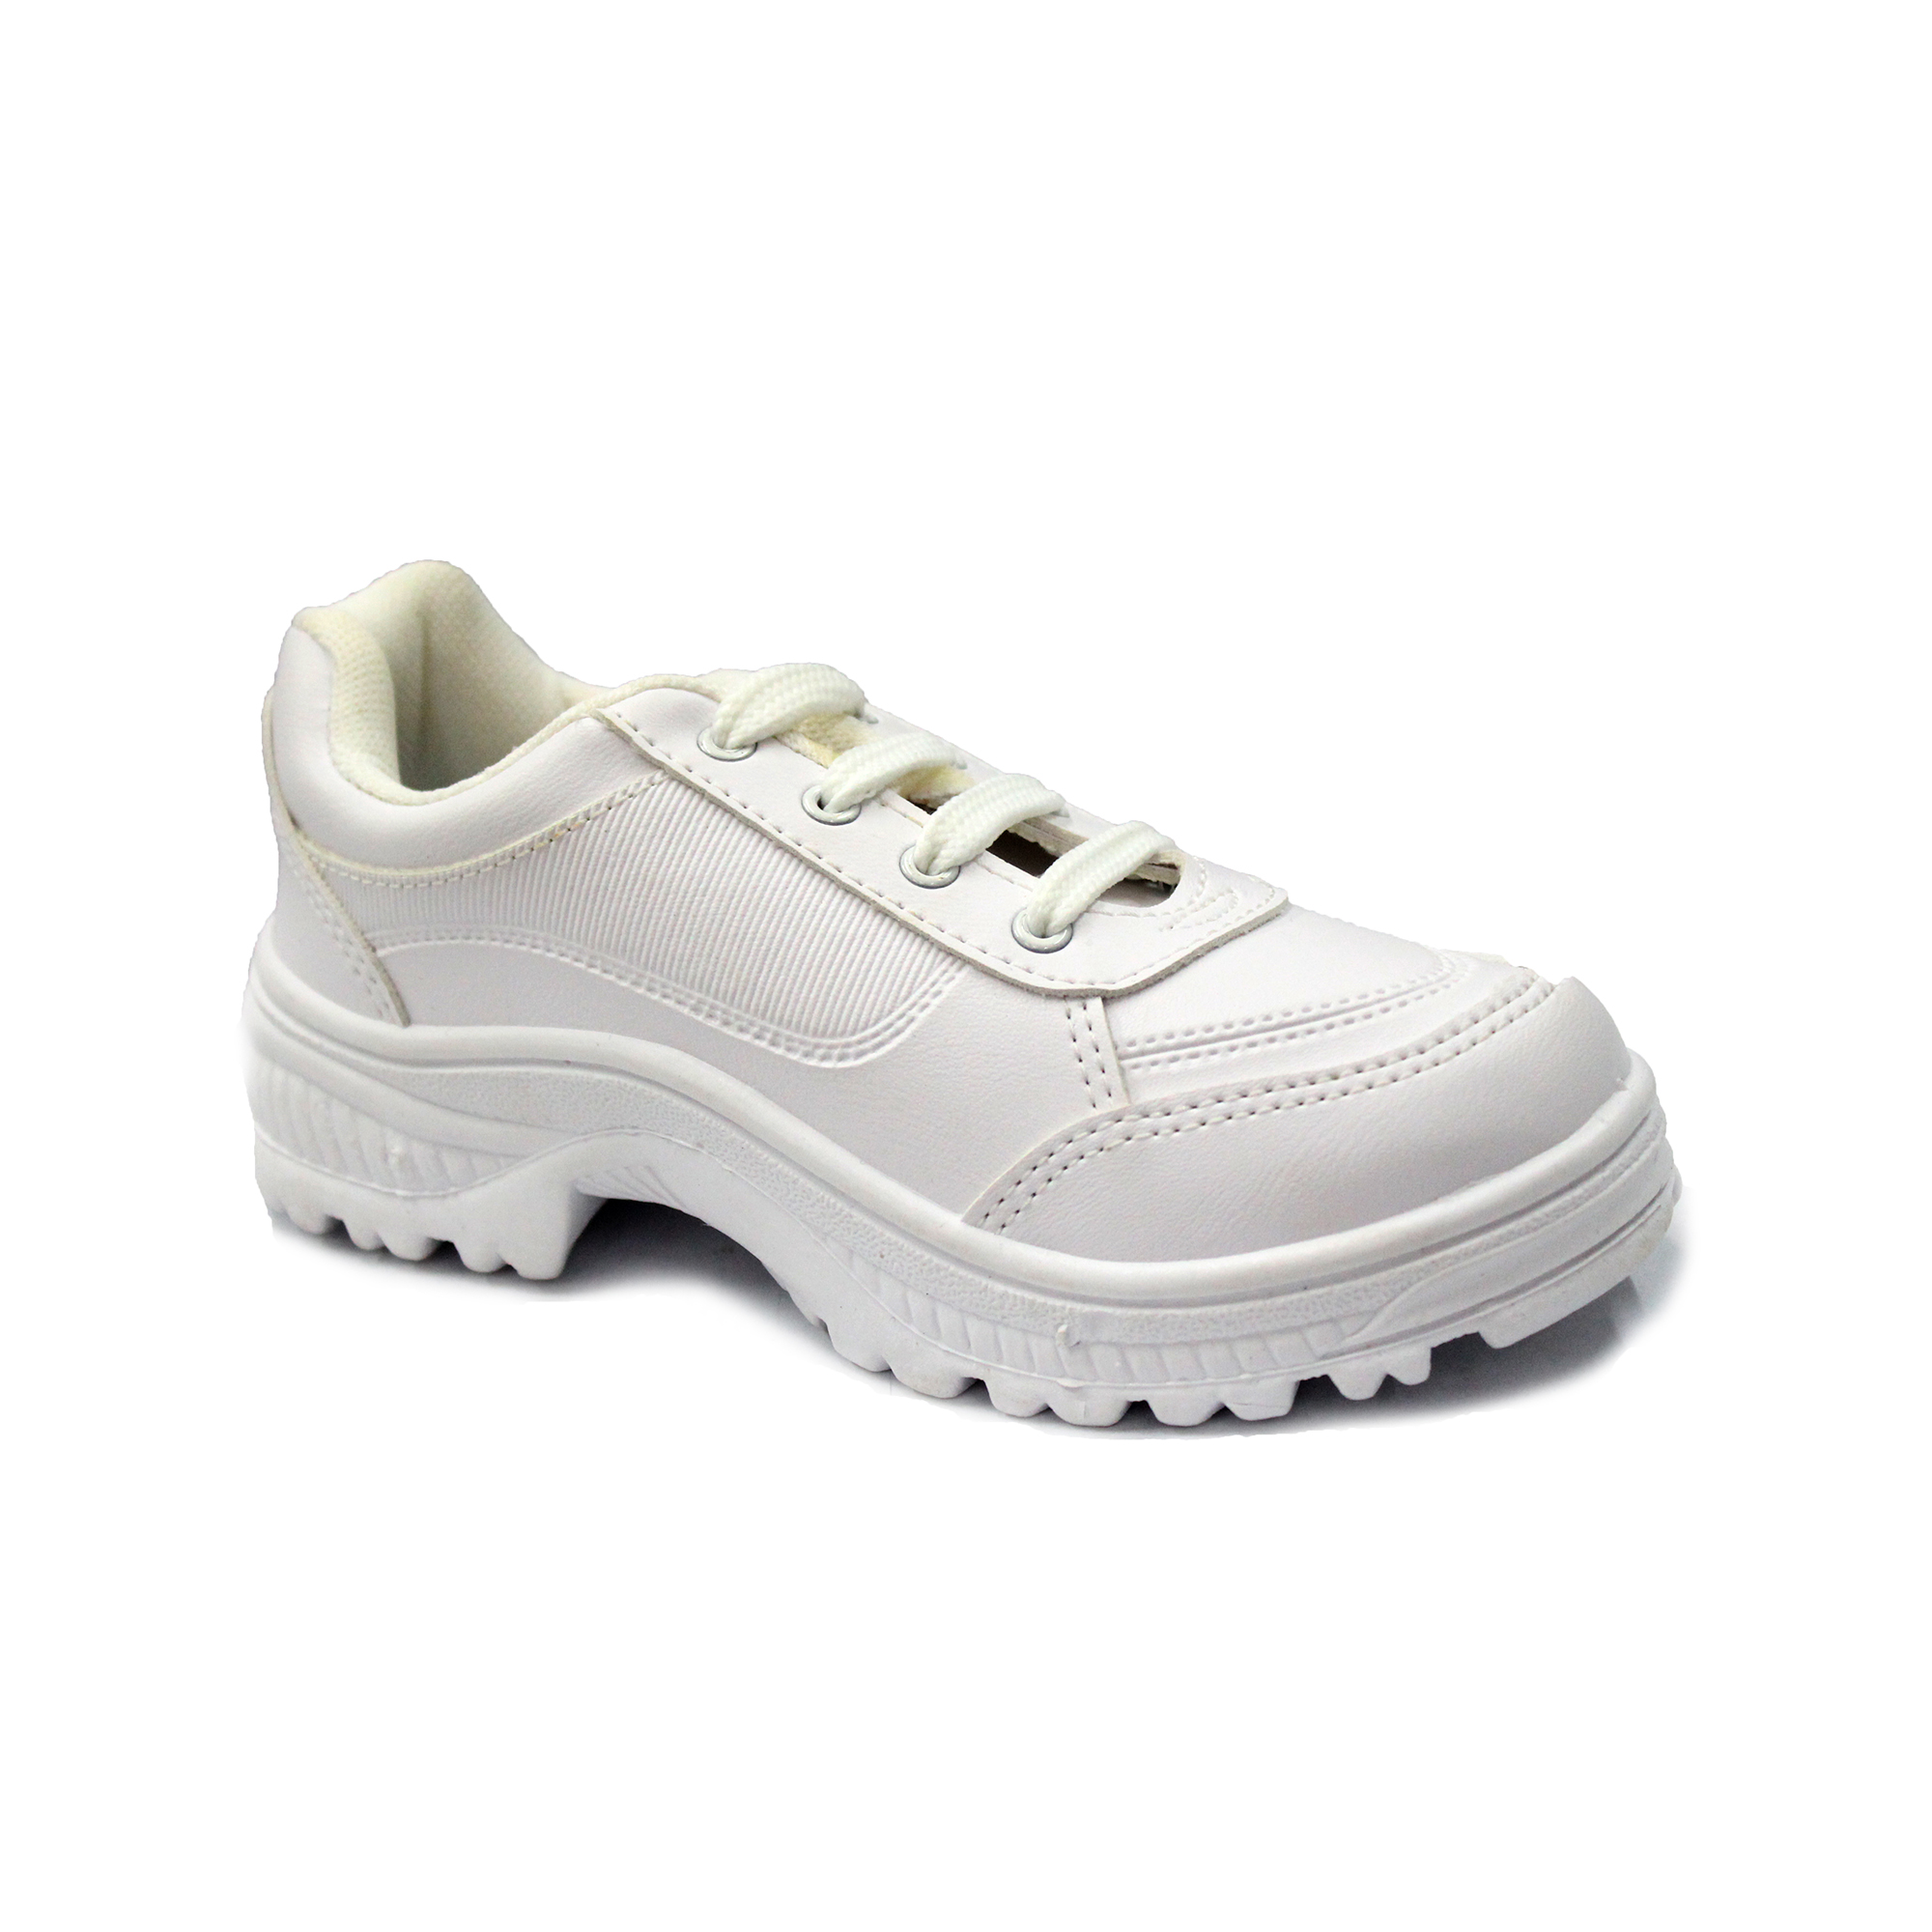 shoes for girls in white colour